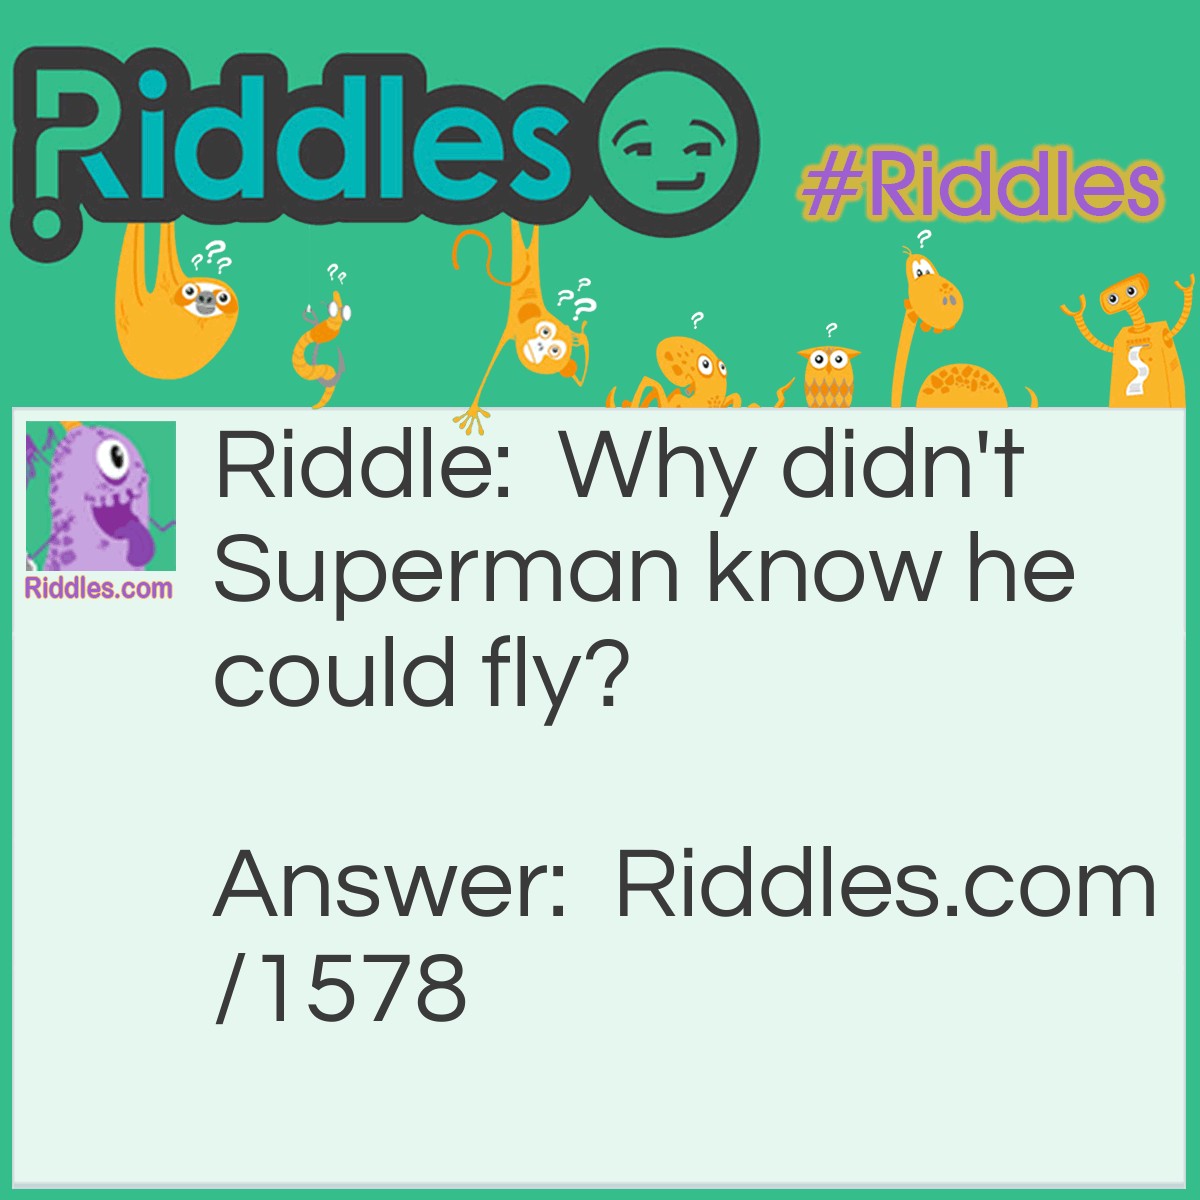 Riddle: Why didn't Superman know he could fly? Answer: He didn't know his cape-abilities.